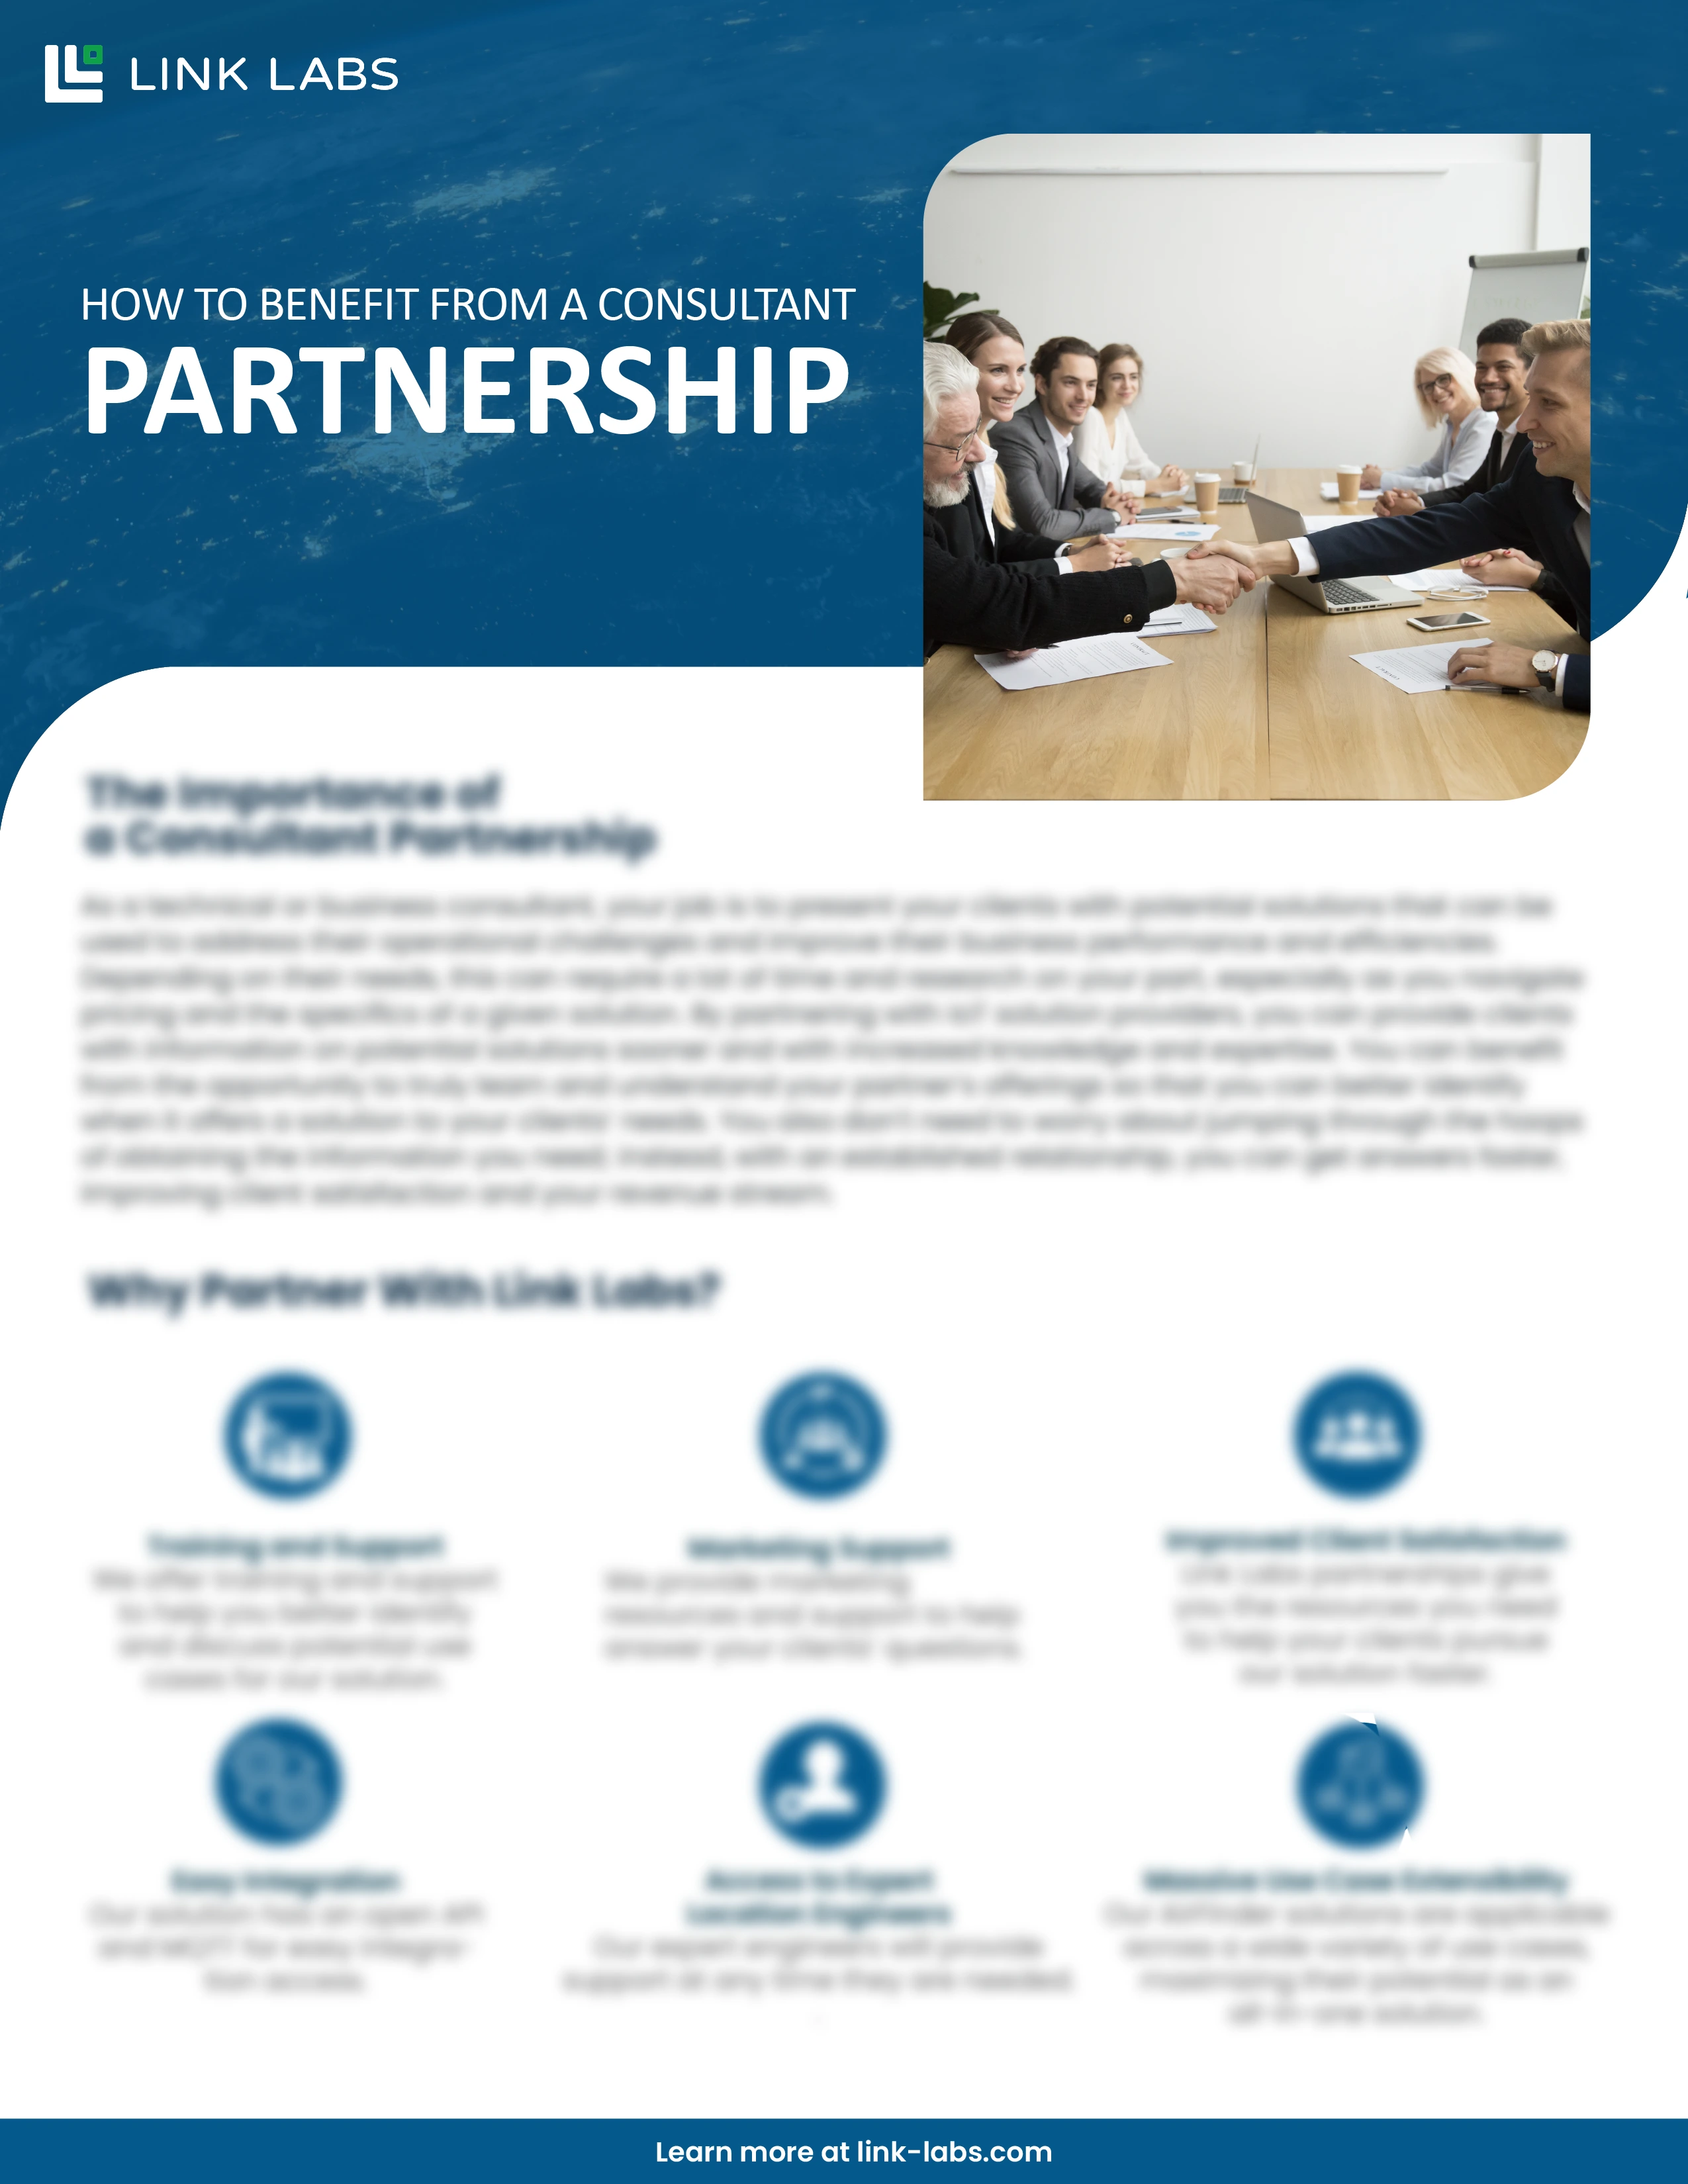 https://www.link-labs.com/consultant-partnership-brief